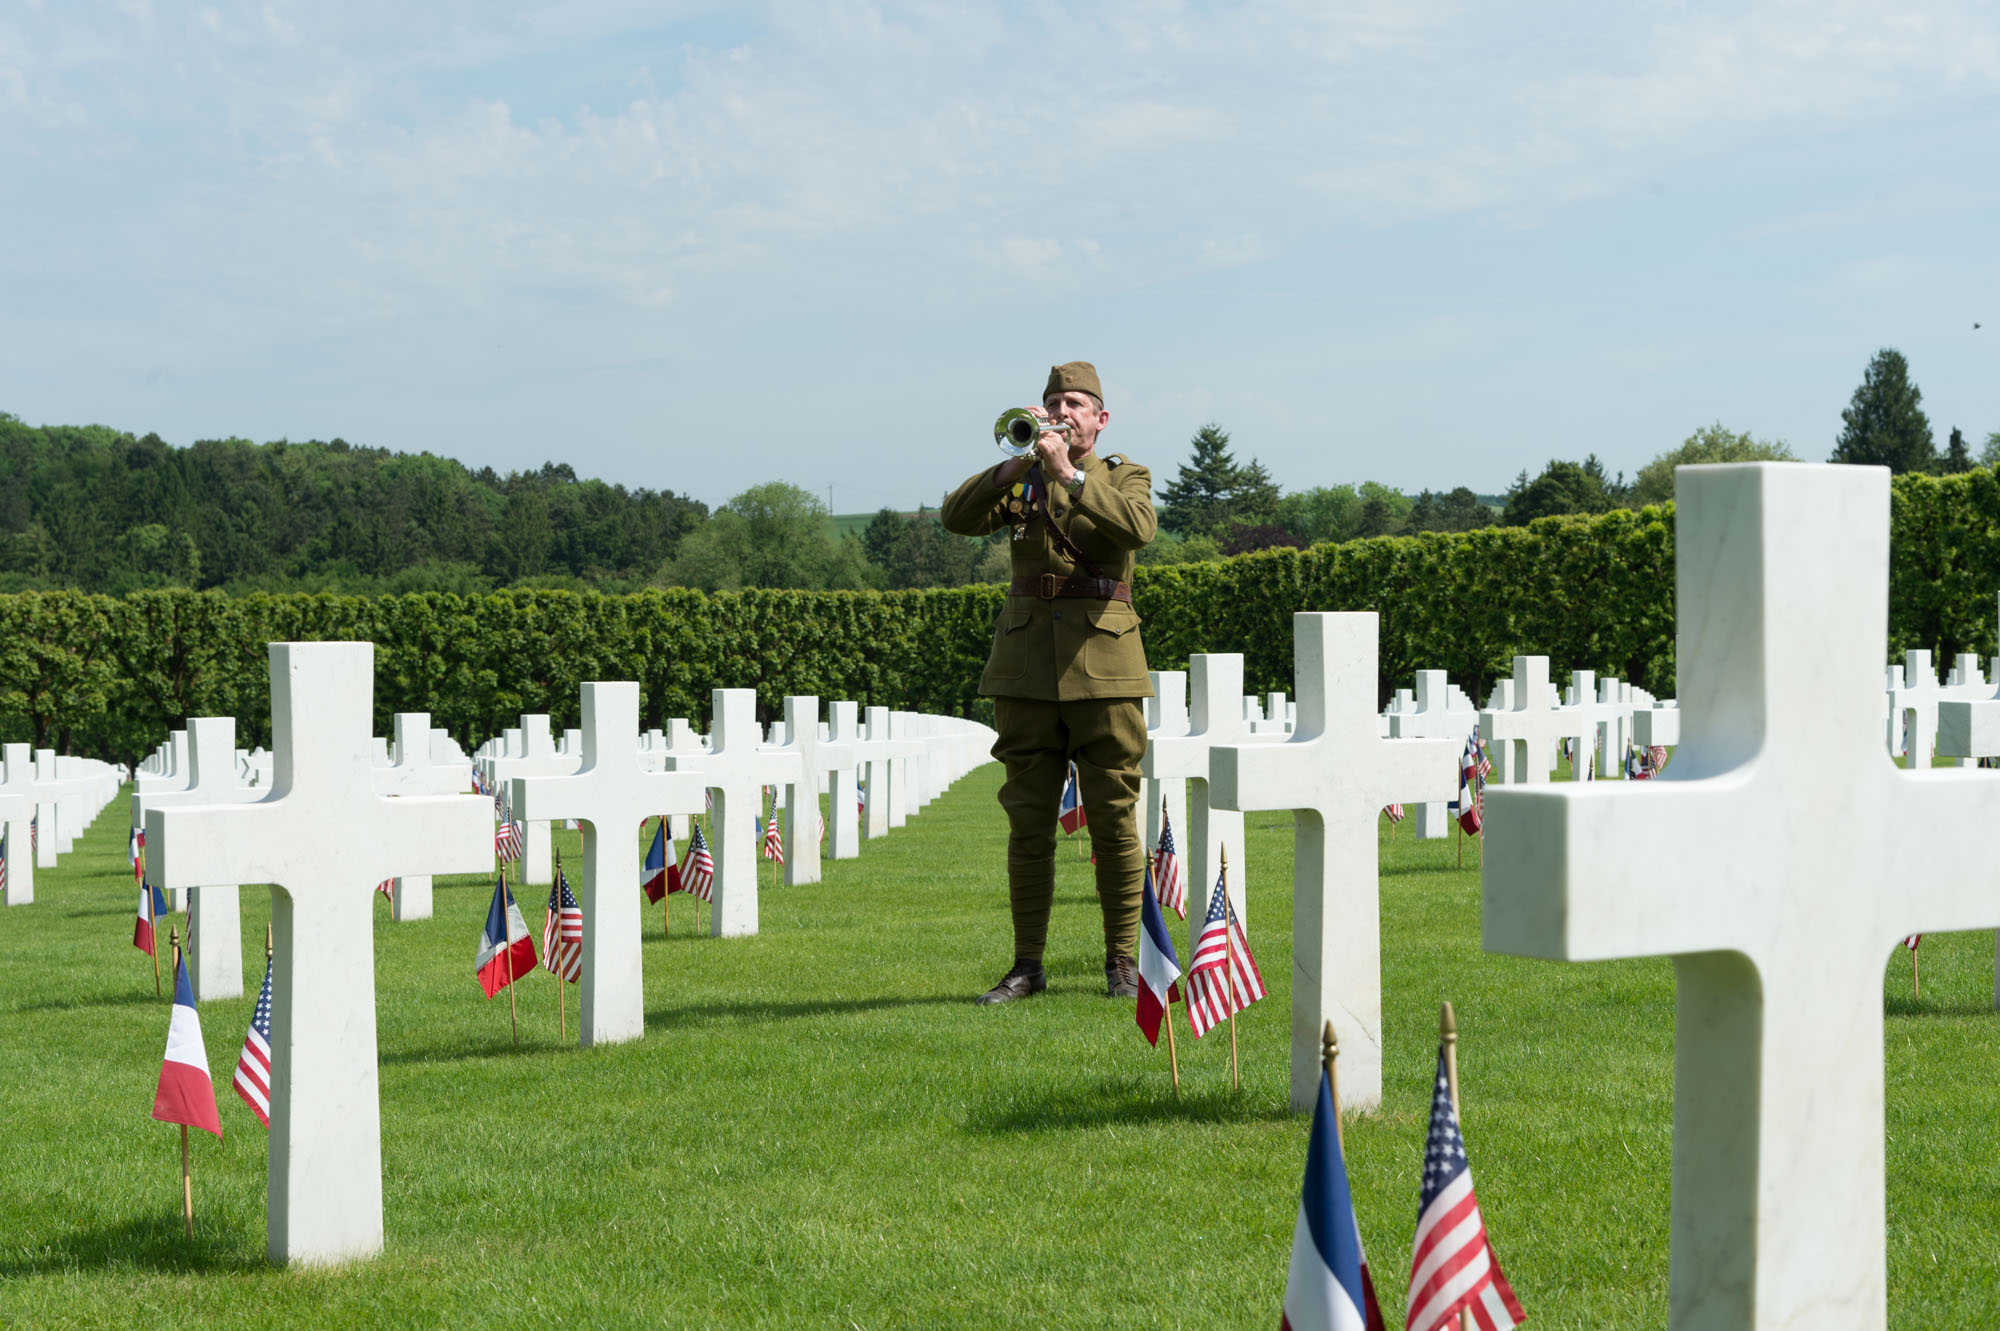 A man in a doughboy uniform plays the bugle amidst the headstones.